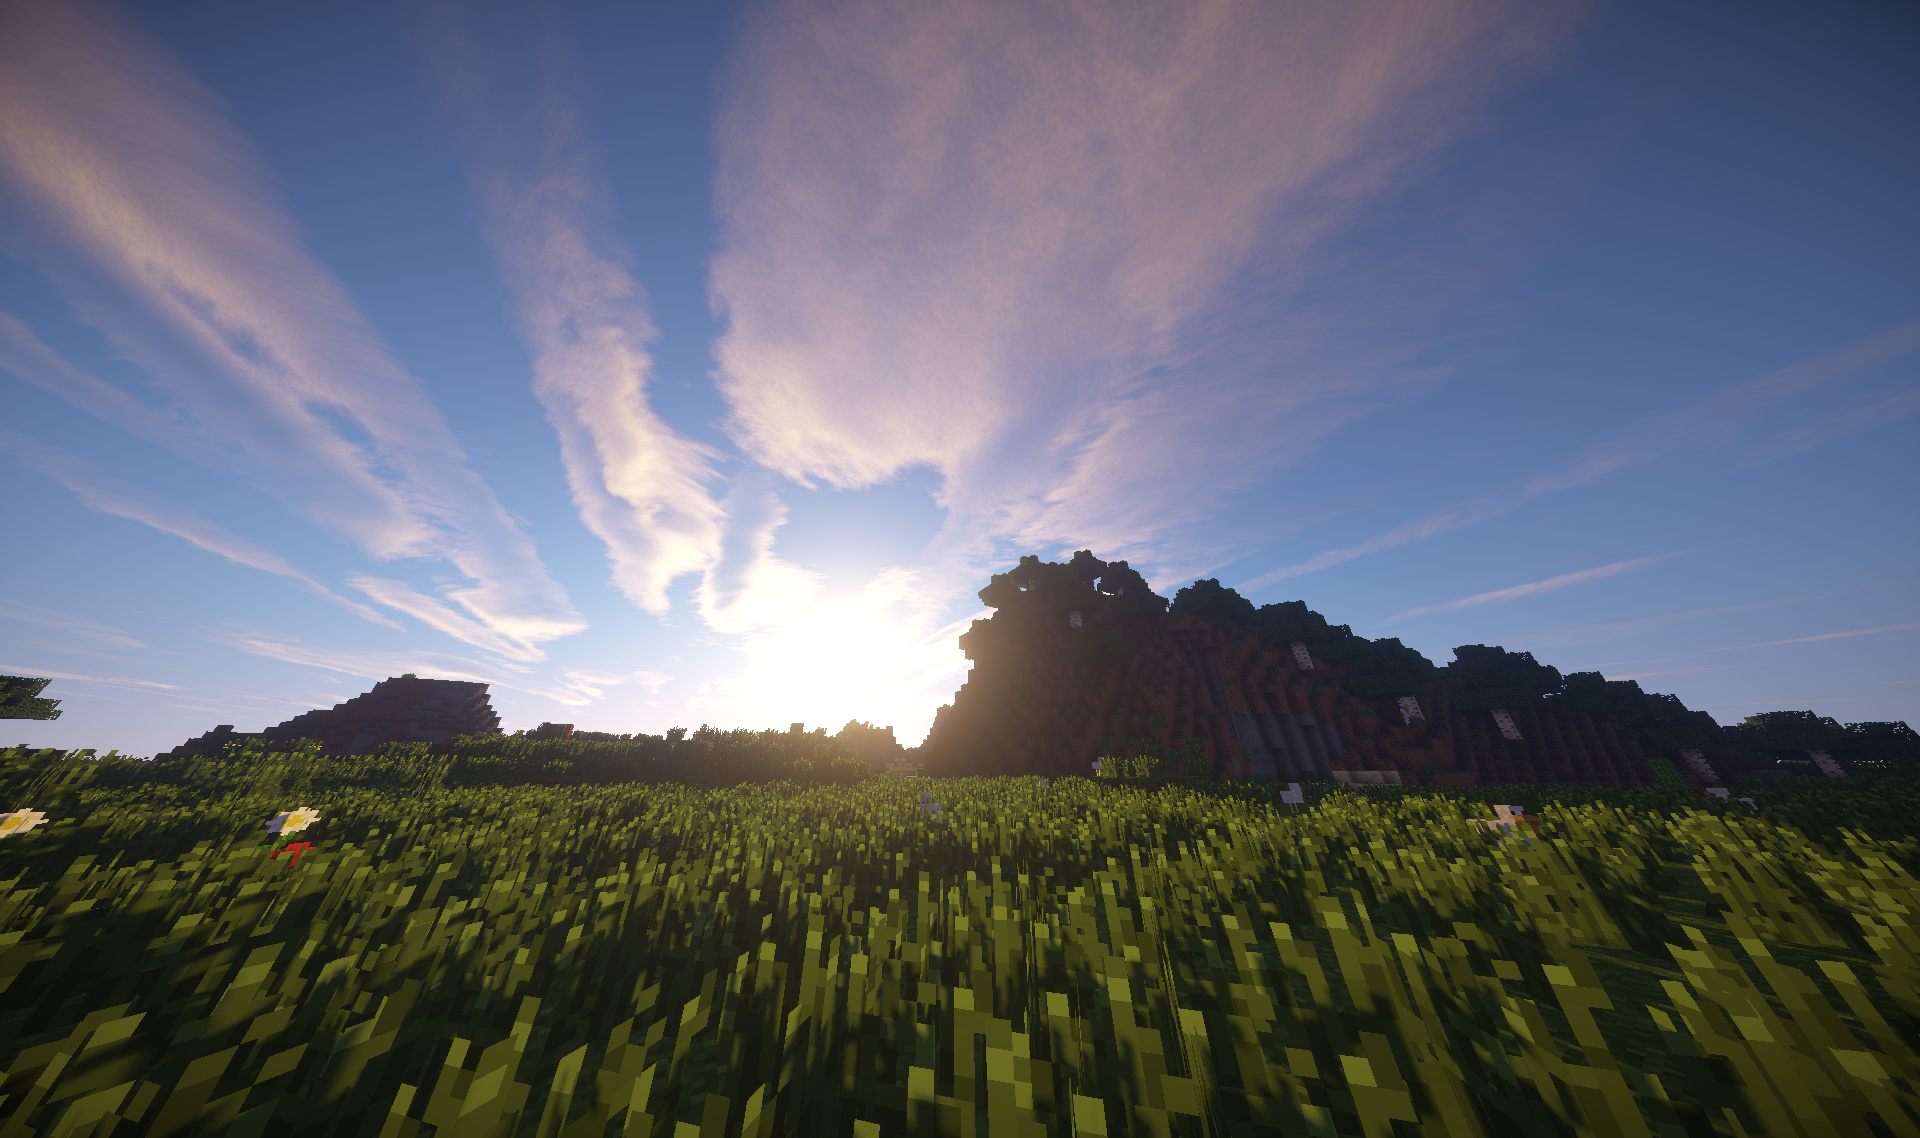 minecraft shader 1.12 for curse launcher